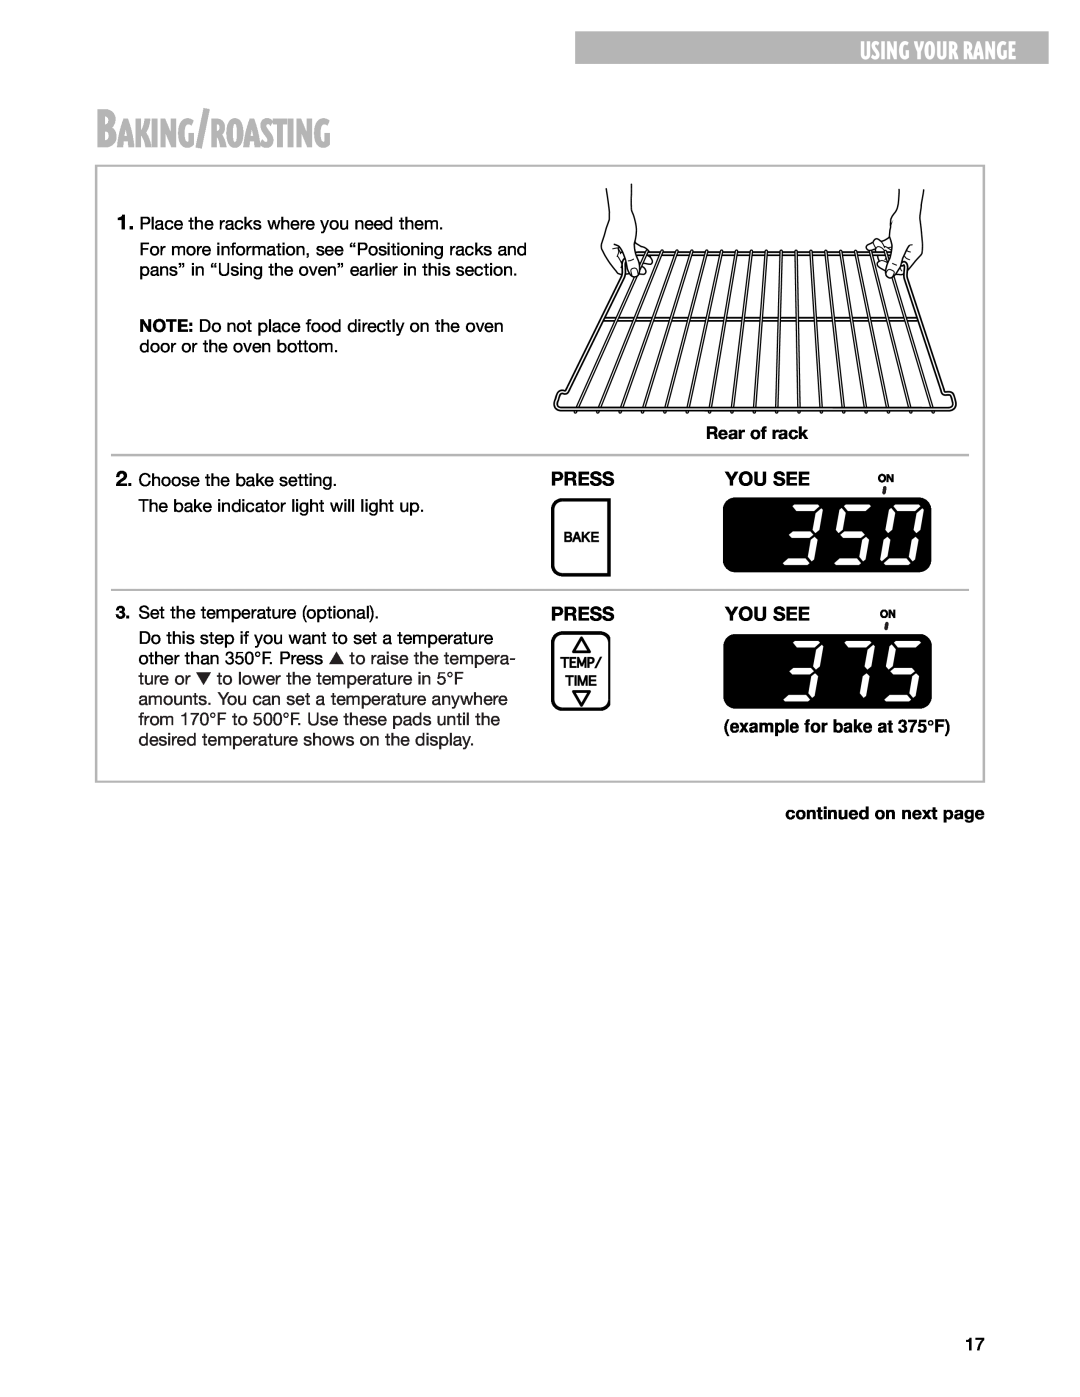 Whirlpool RF378PXG, RF377PXG Baking/Roasting, Using Your Range, Press, You See, Rear of rack, example for bake at 375F 